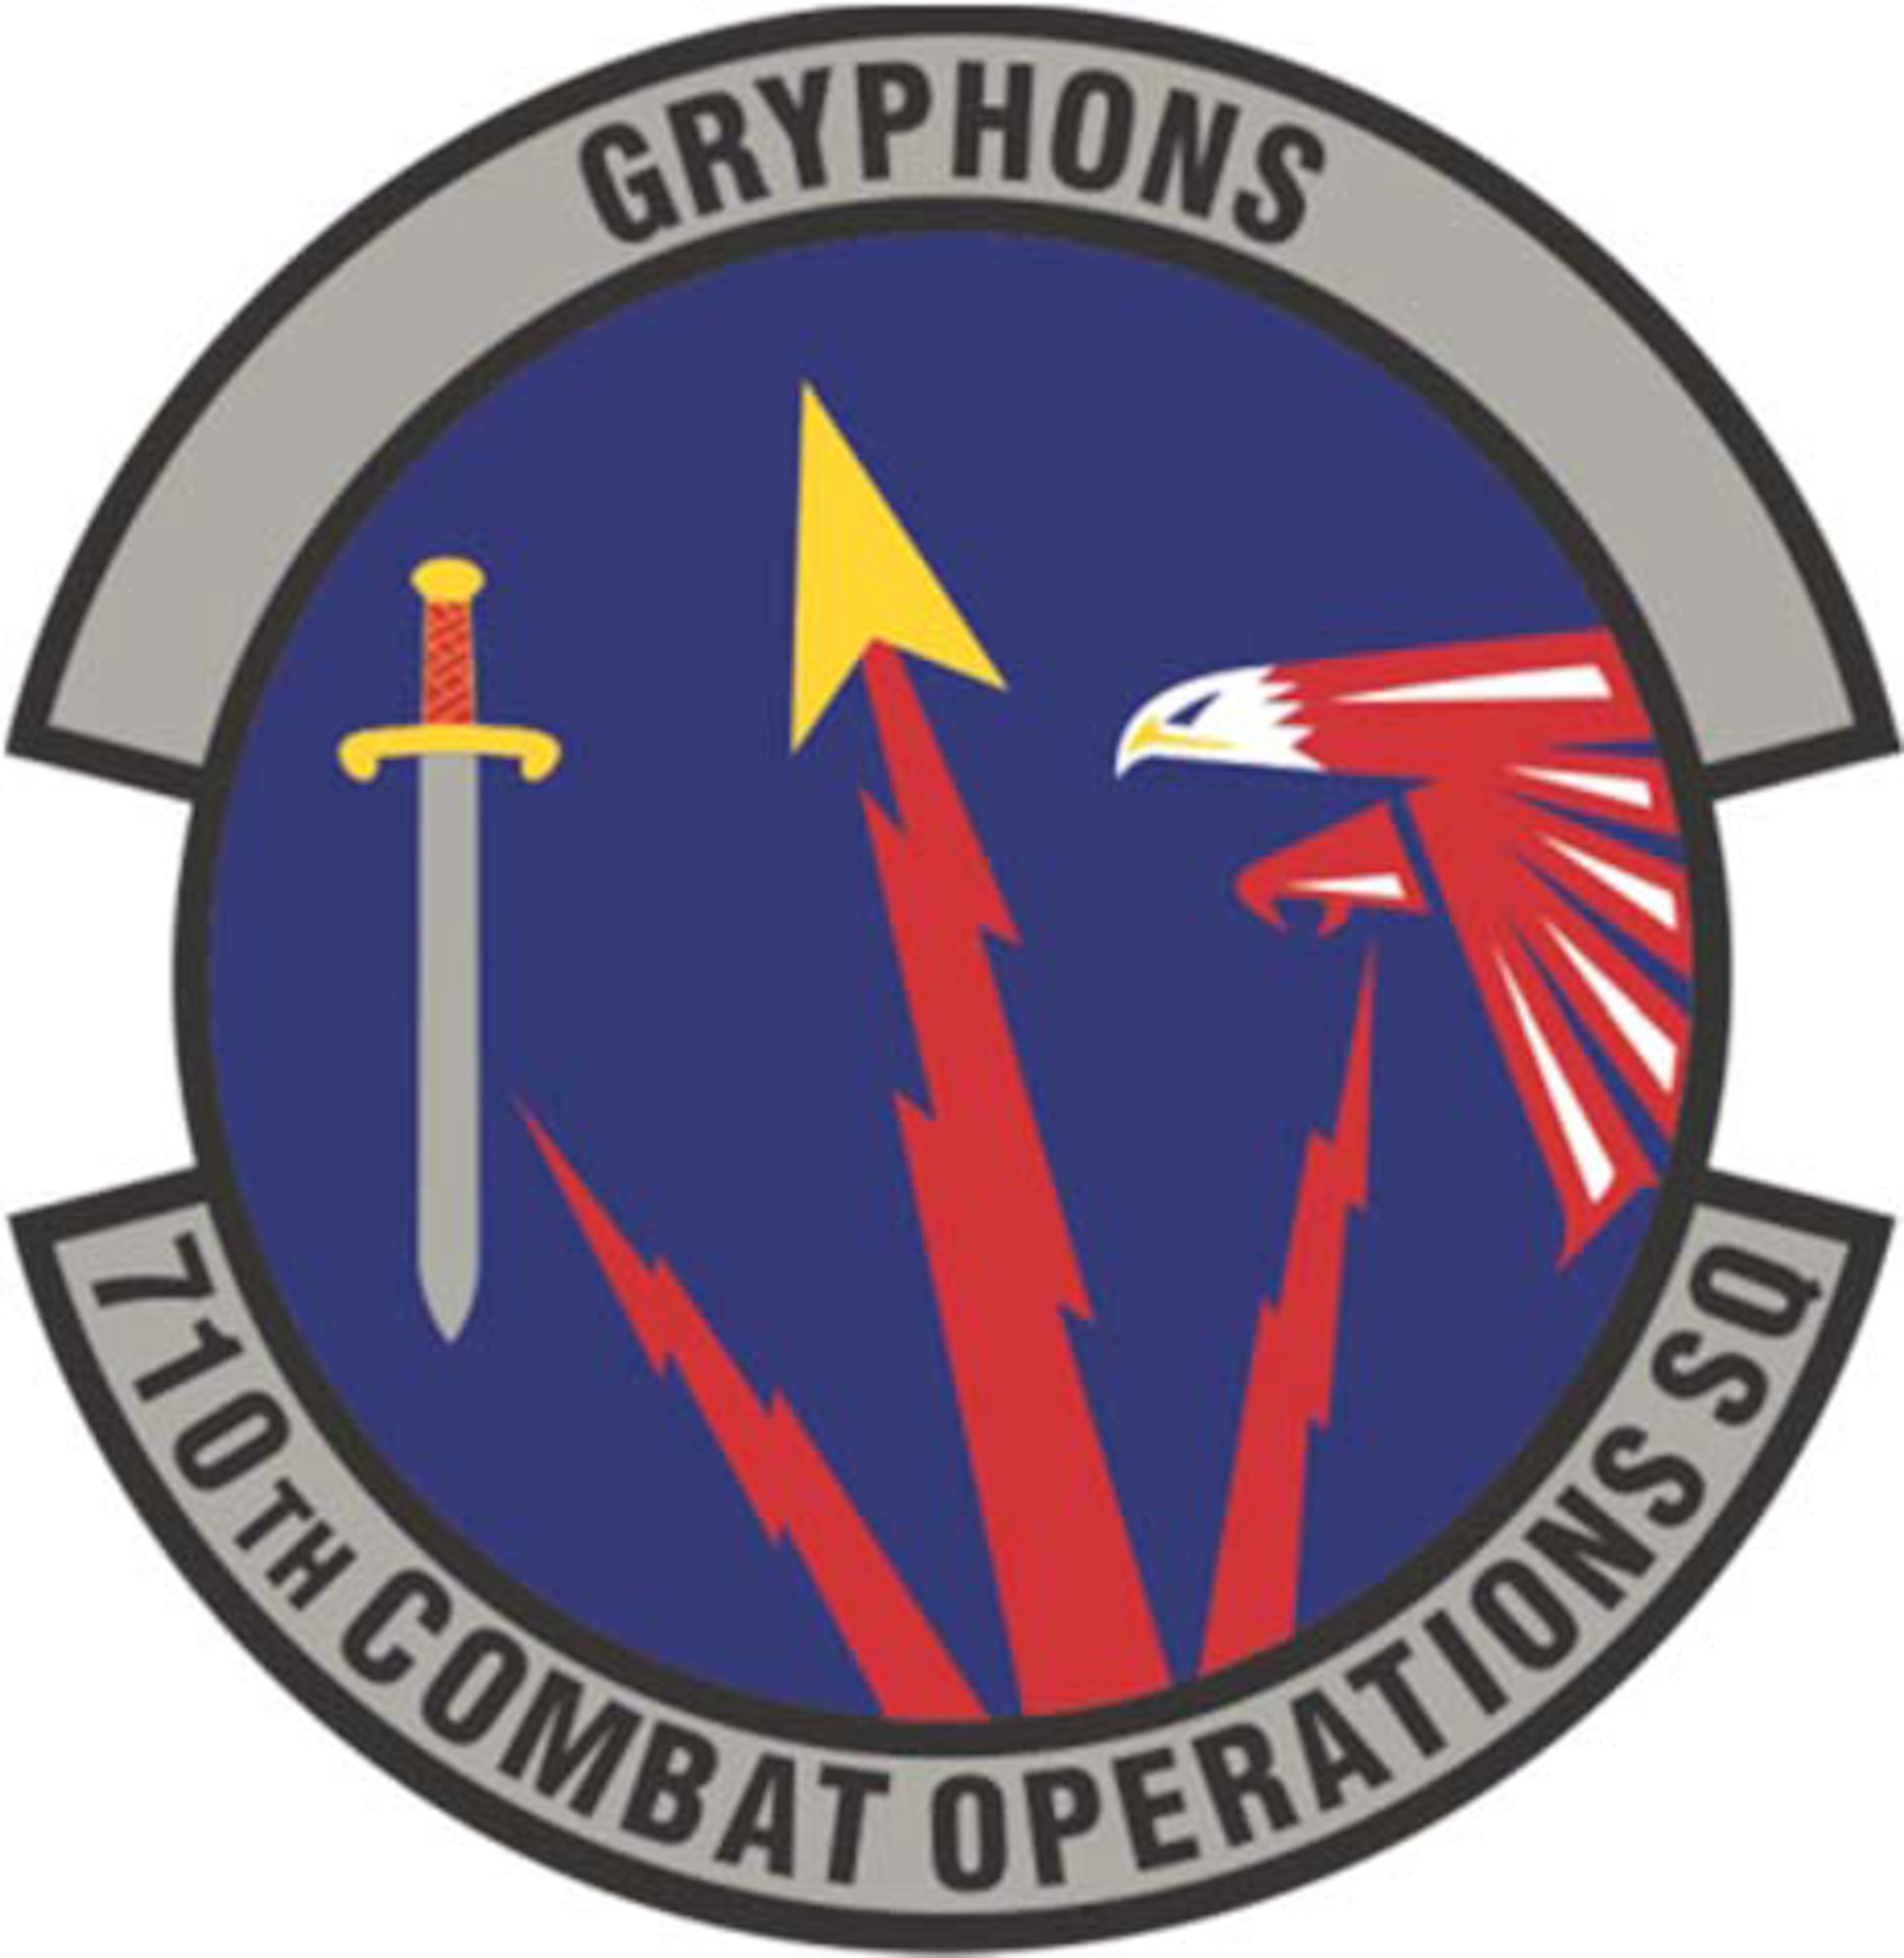 The 710th Combat Operations Squadron's official patch